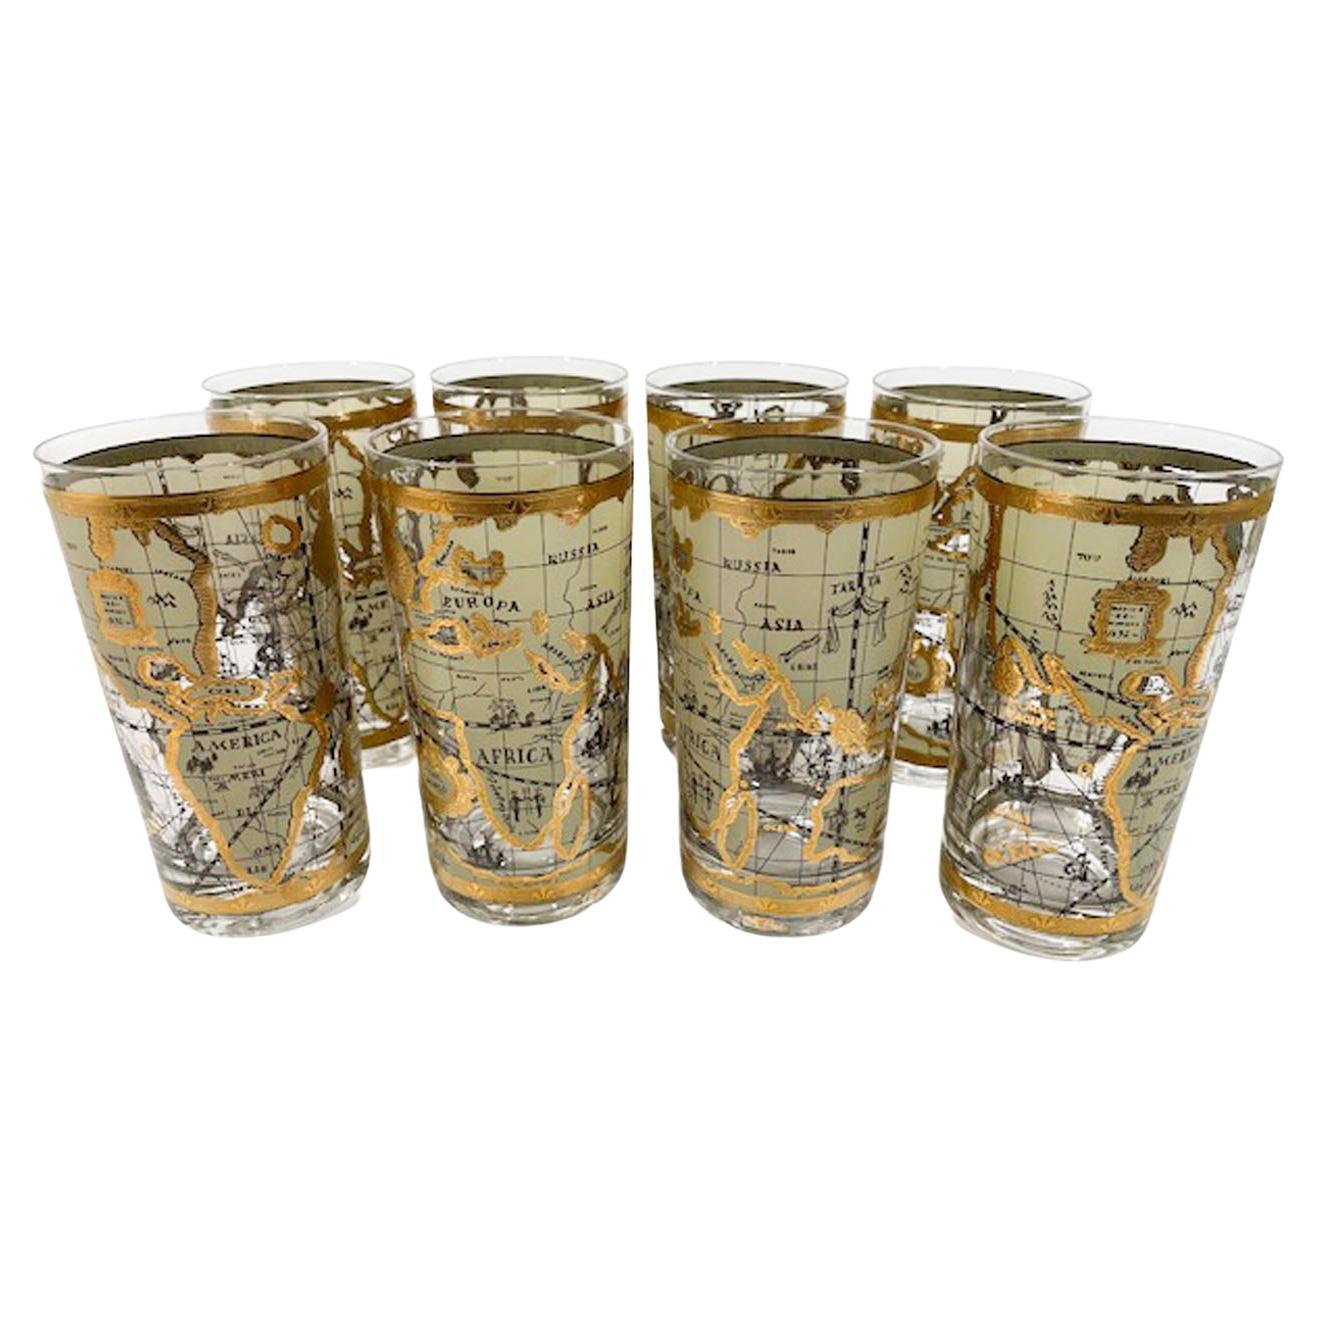 Set of 8 Vintage Highball Glasses by Cera in the Old World Map Pattern